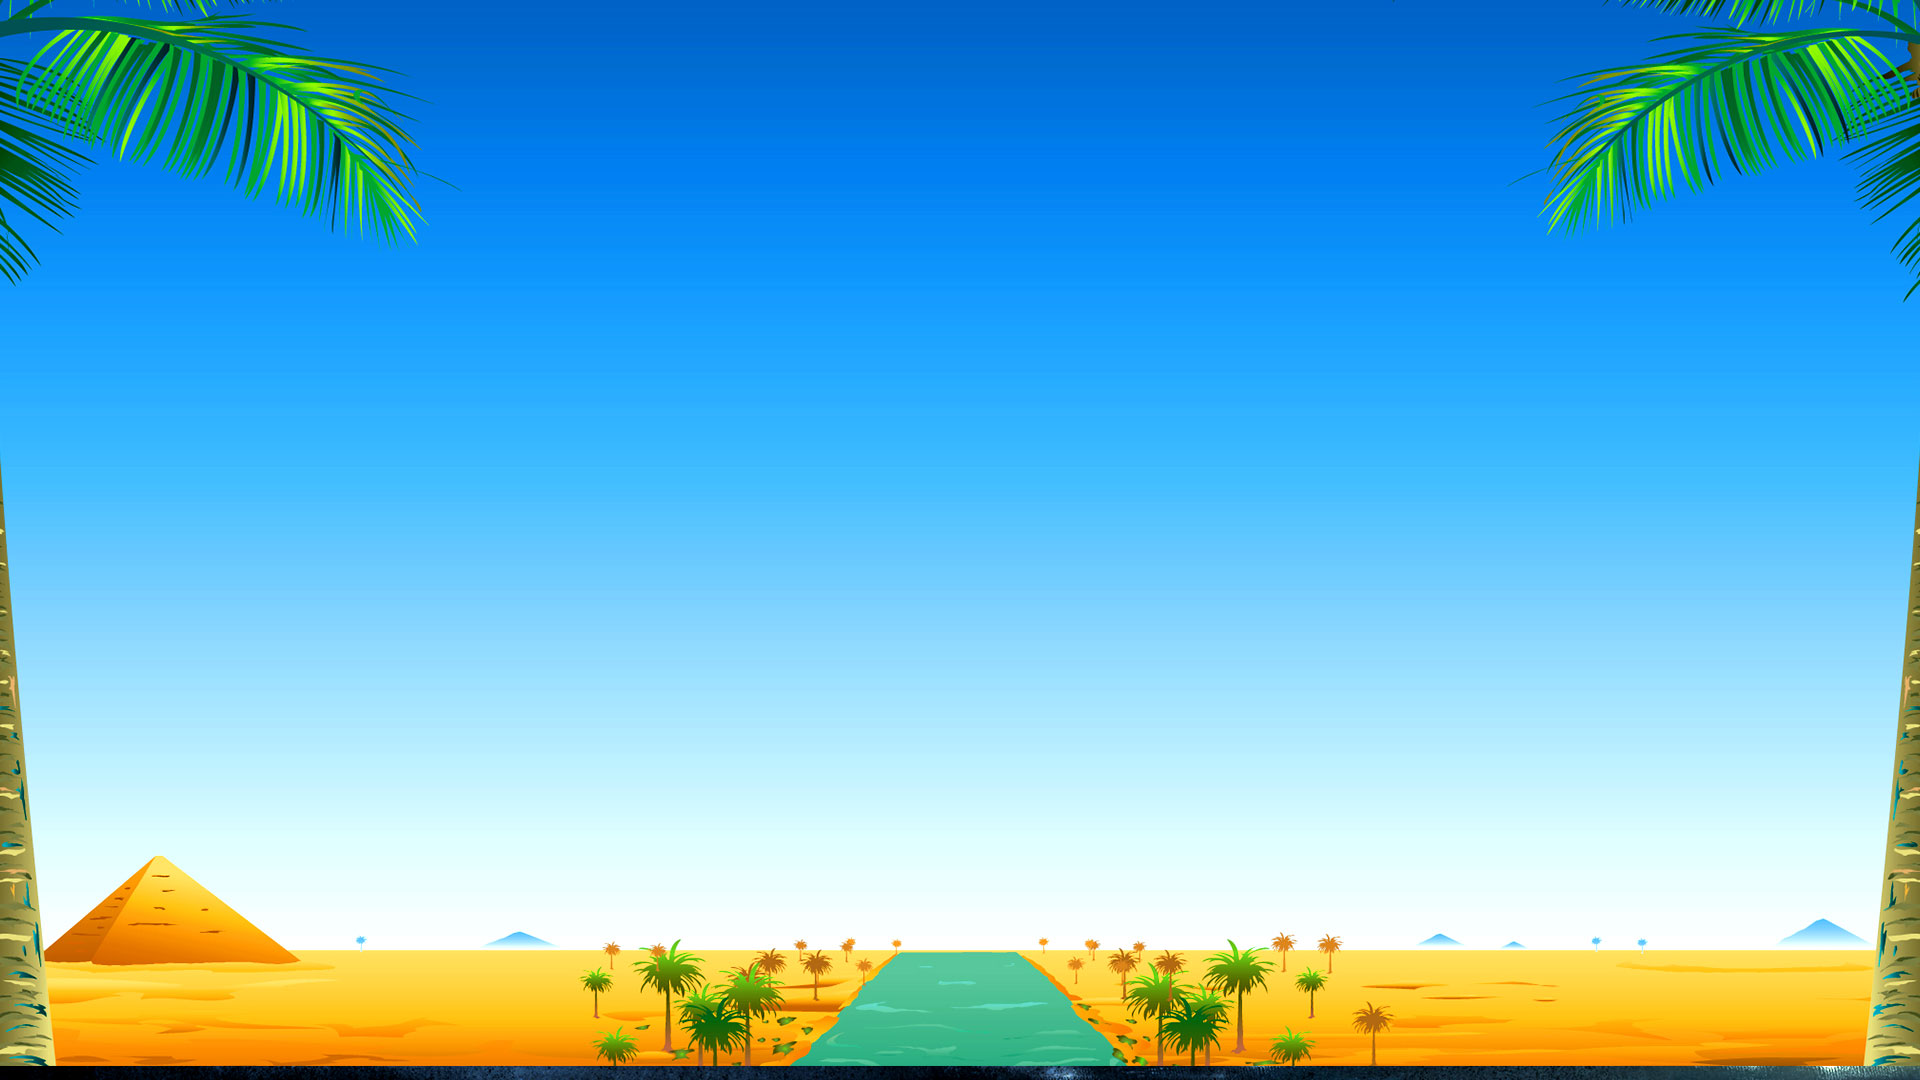 Game hight resolution background Ramesses Riches